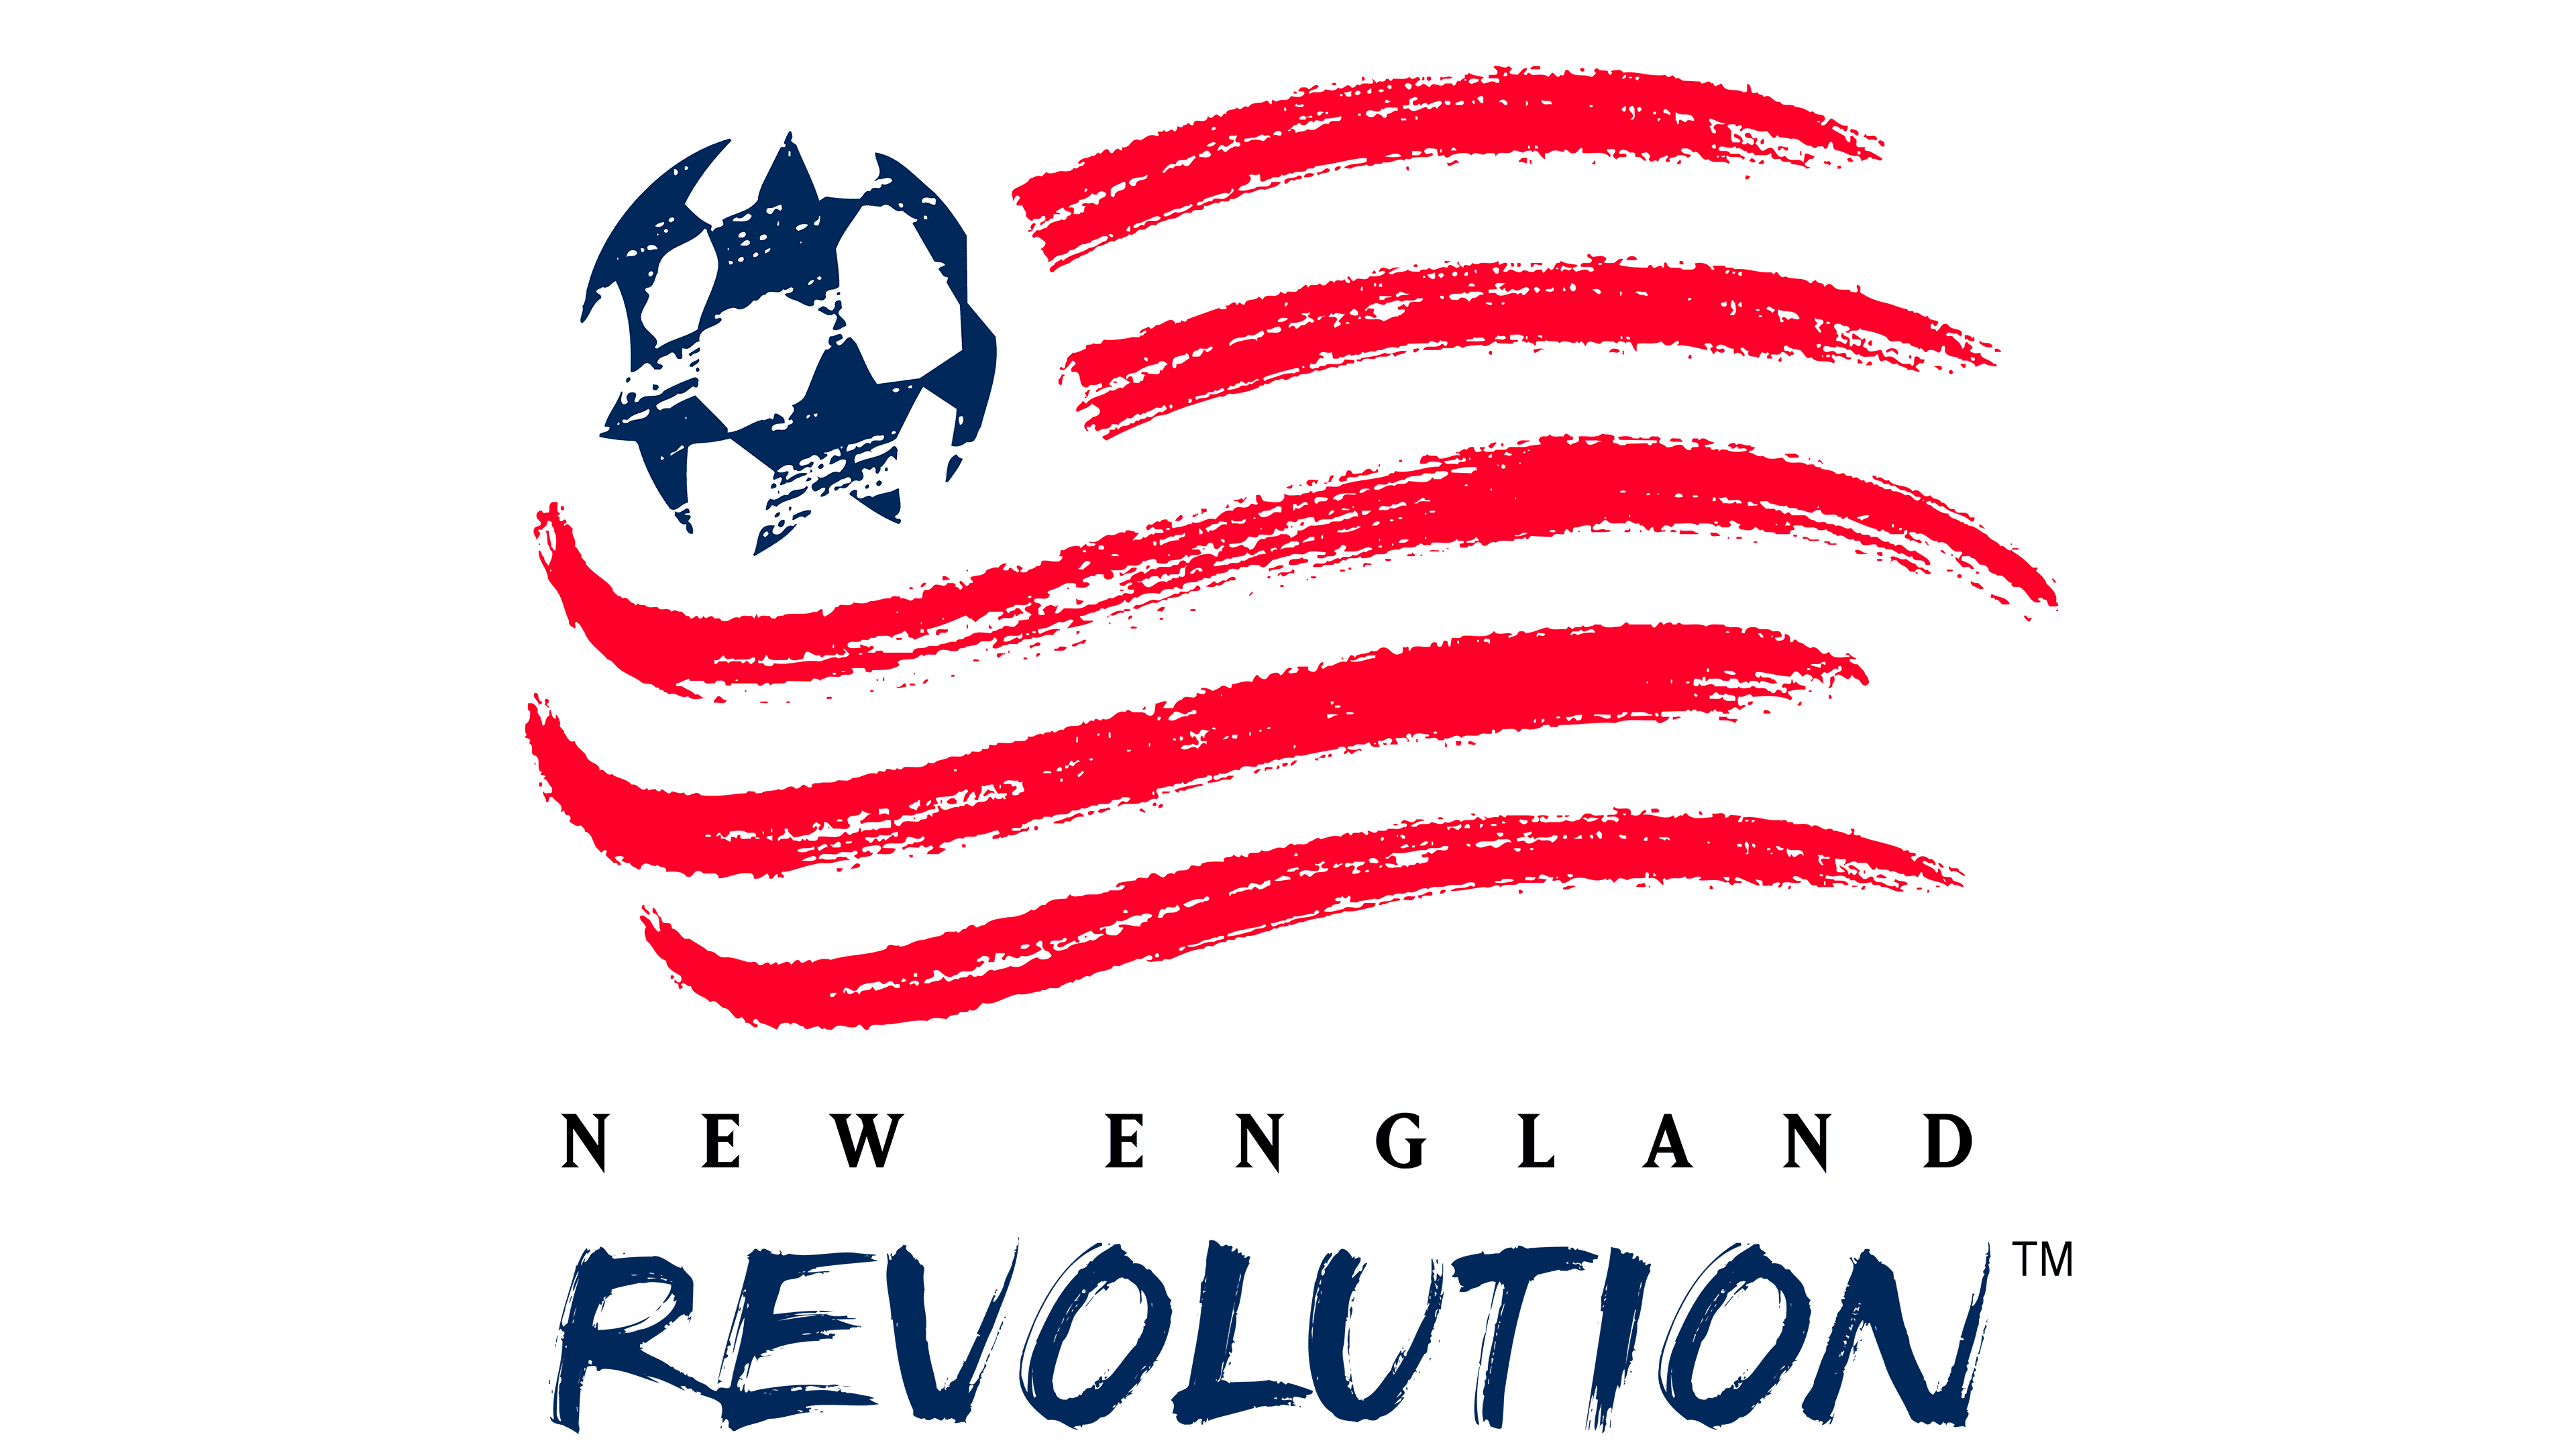 New England Revolution Logo, PNG, Symbol, History, Meaning